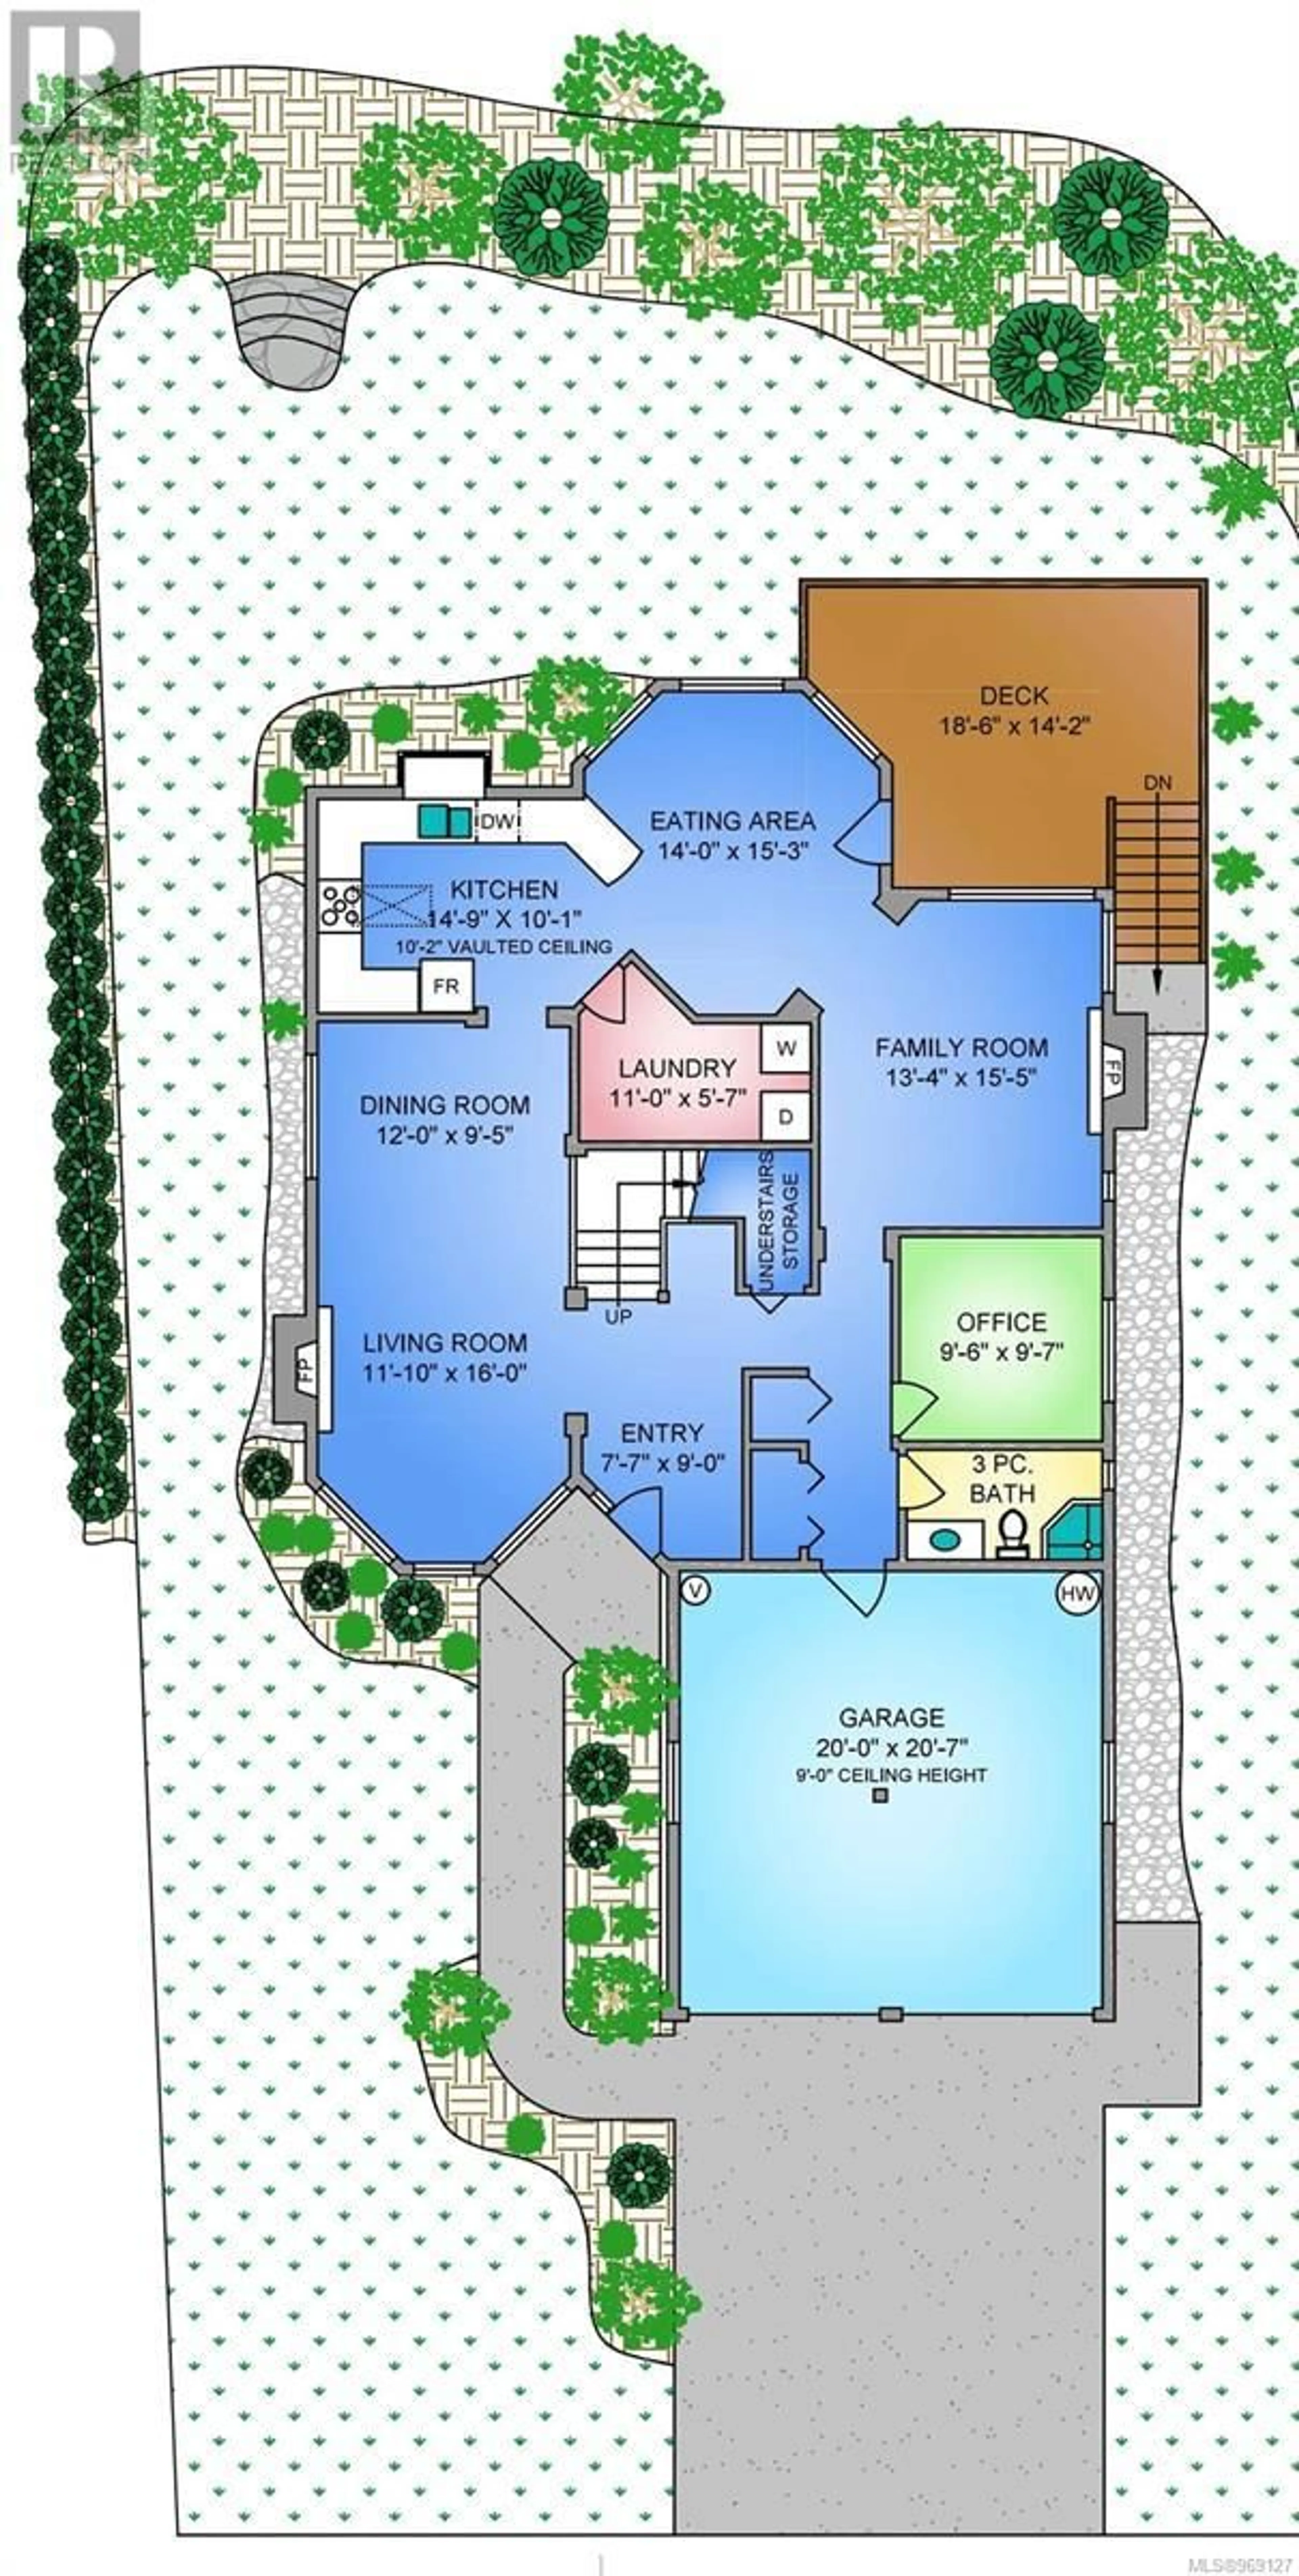 Floor plan for 2215 Meadow Vale Dr, View Royal British Columbia V9B6J2